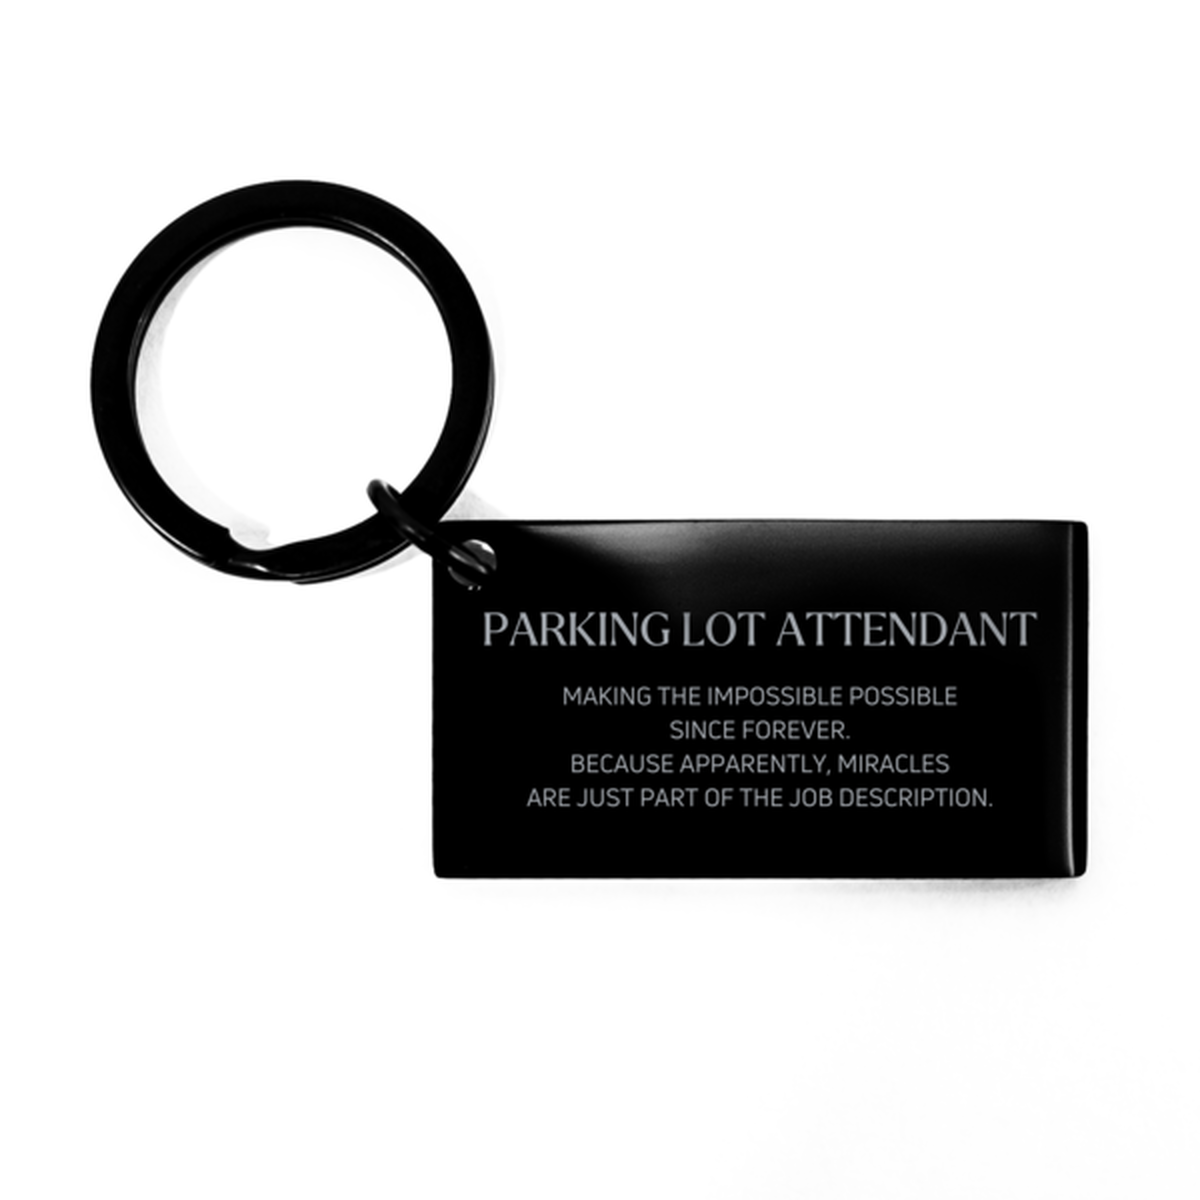 Funny Parking Lot Attendant Gifts, Miracles are just part of the job description, Inspirational Birthday Keychain For Parking Lot Attendant, Men, Women, Coworkers, Friends, Boss